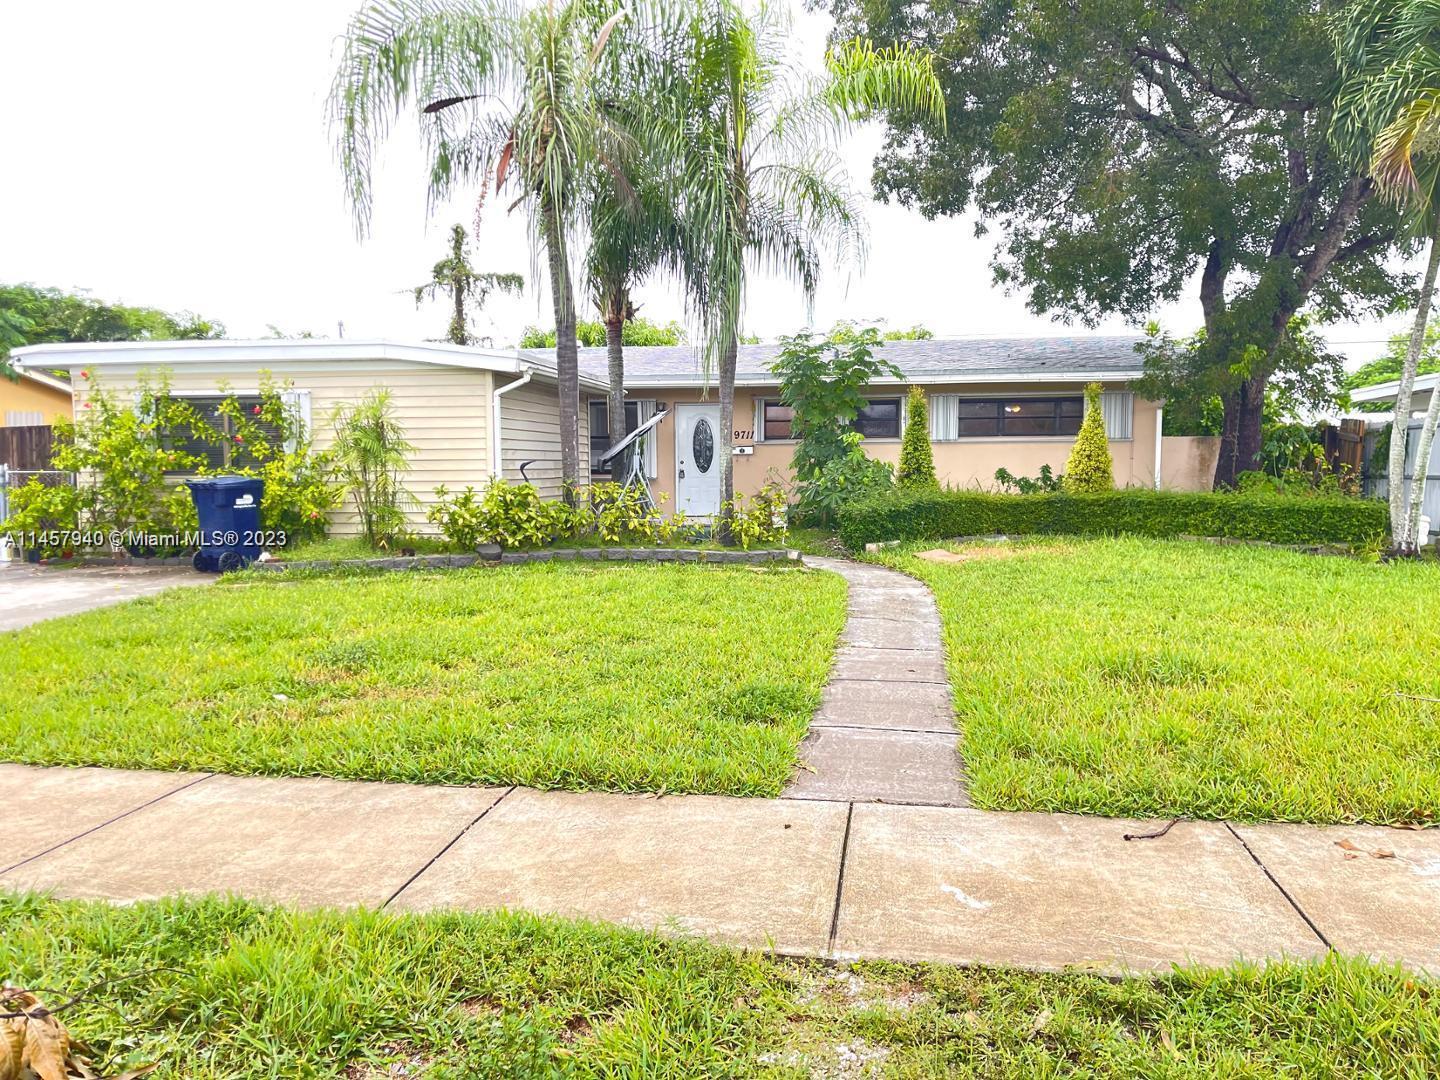 Great Location! Beautiful duplex home in Cutler Bay steps away from the bus stop and minutes from shopping, banks and much more!!  ,fenced yard . Covered insulated patio and room for a pool, RV or boat . NO HOA!! this is dupex, left side unit 3 bedroom 1 bathroom with one extra storage room is still available, $2400 per month. right side 3 bedroom 2 bathroom unit is already rented